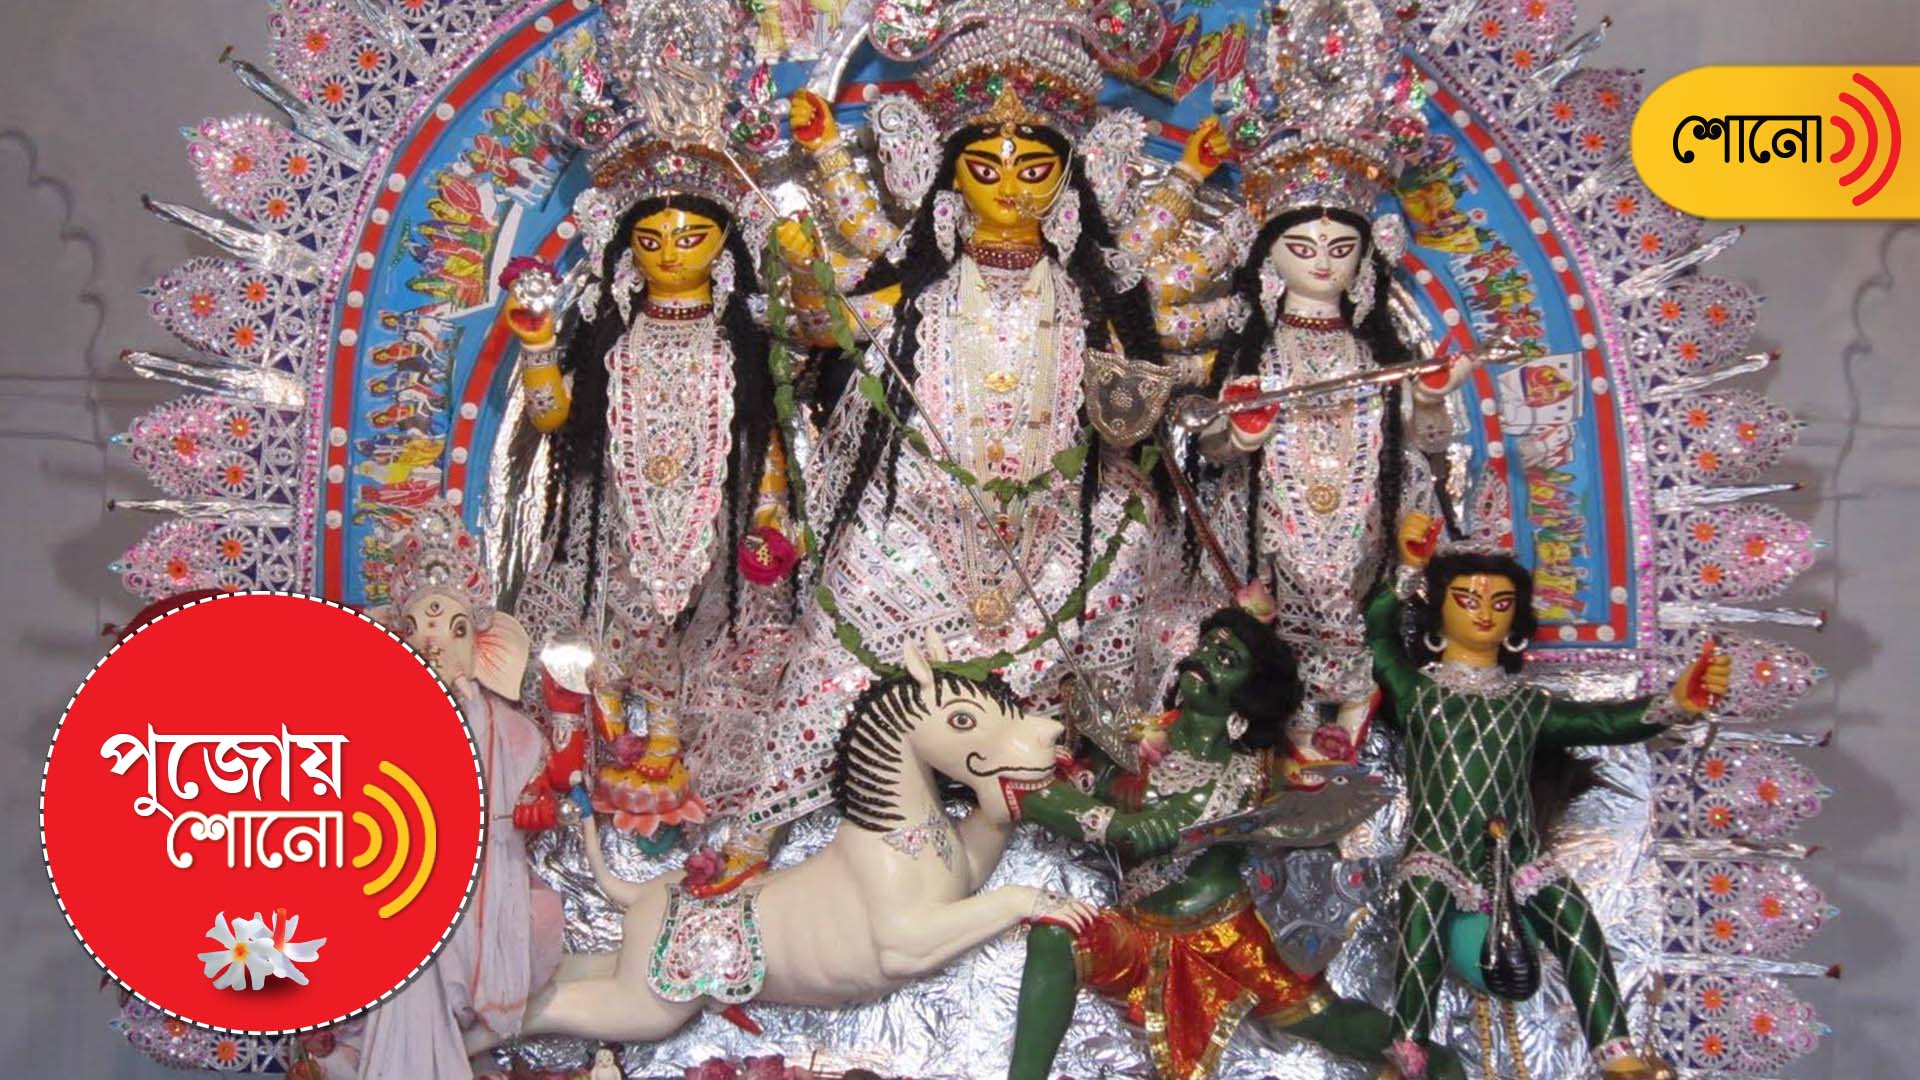 know more about the horse mouthed lion in durga Idol